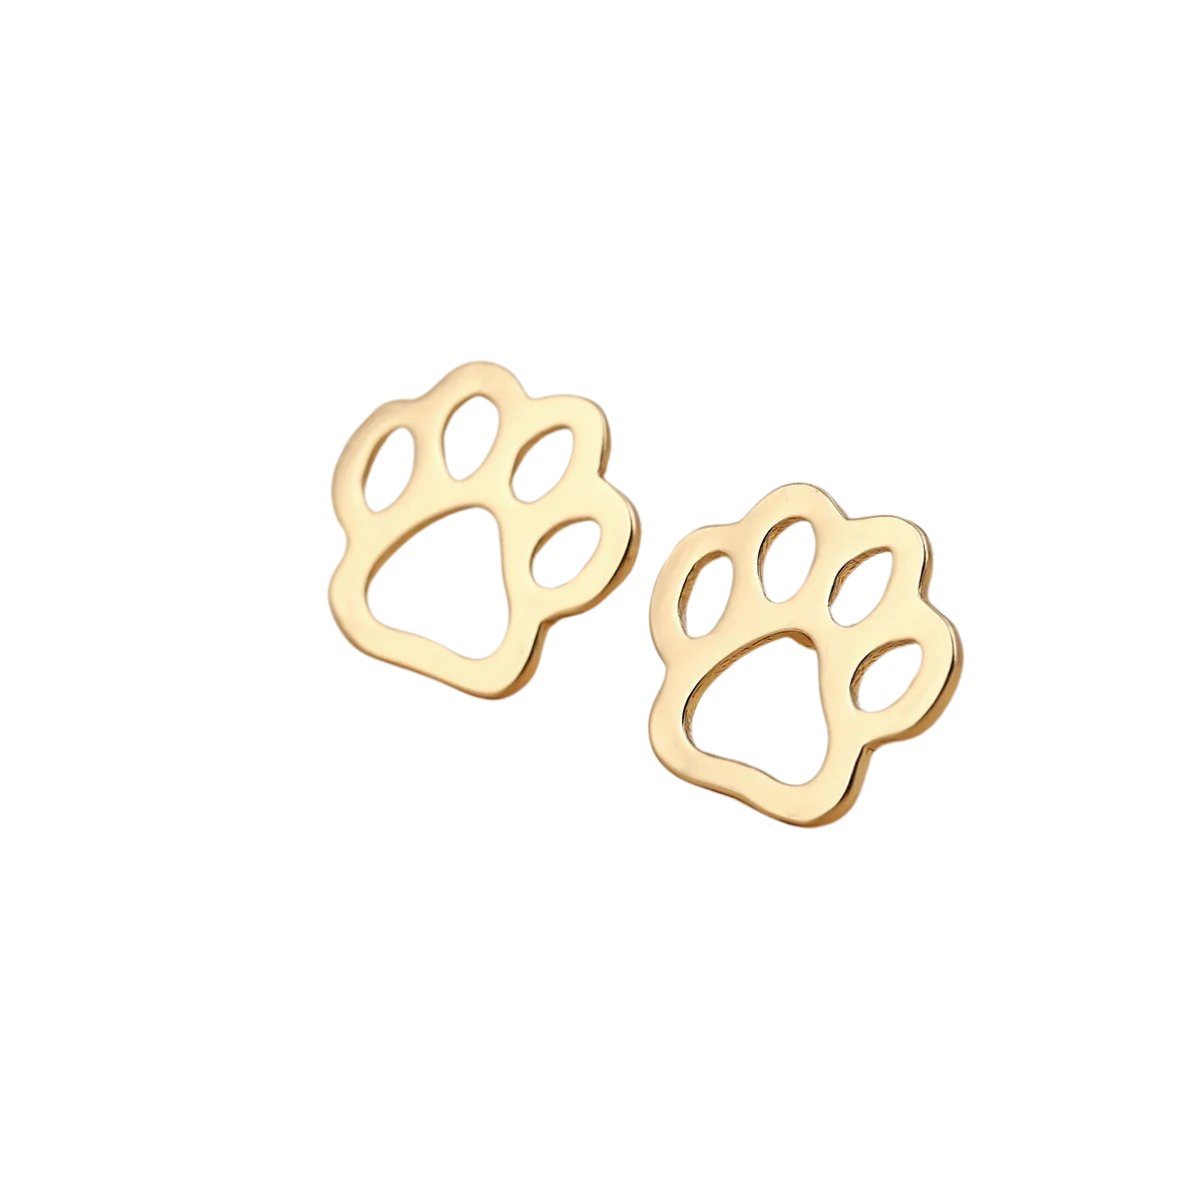 OLIVIA STAINLESS STEEL PAWS EARRINGS - Carol & Co Jewelry